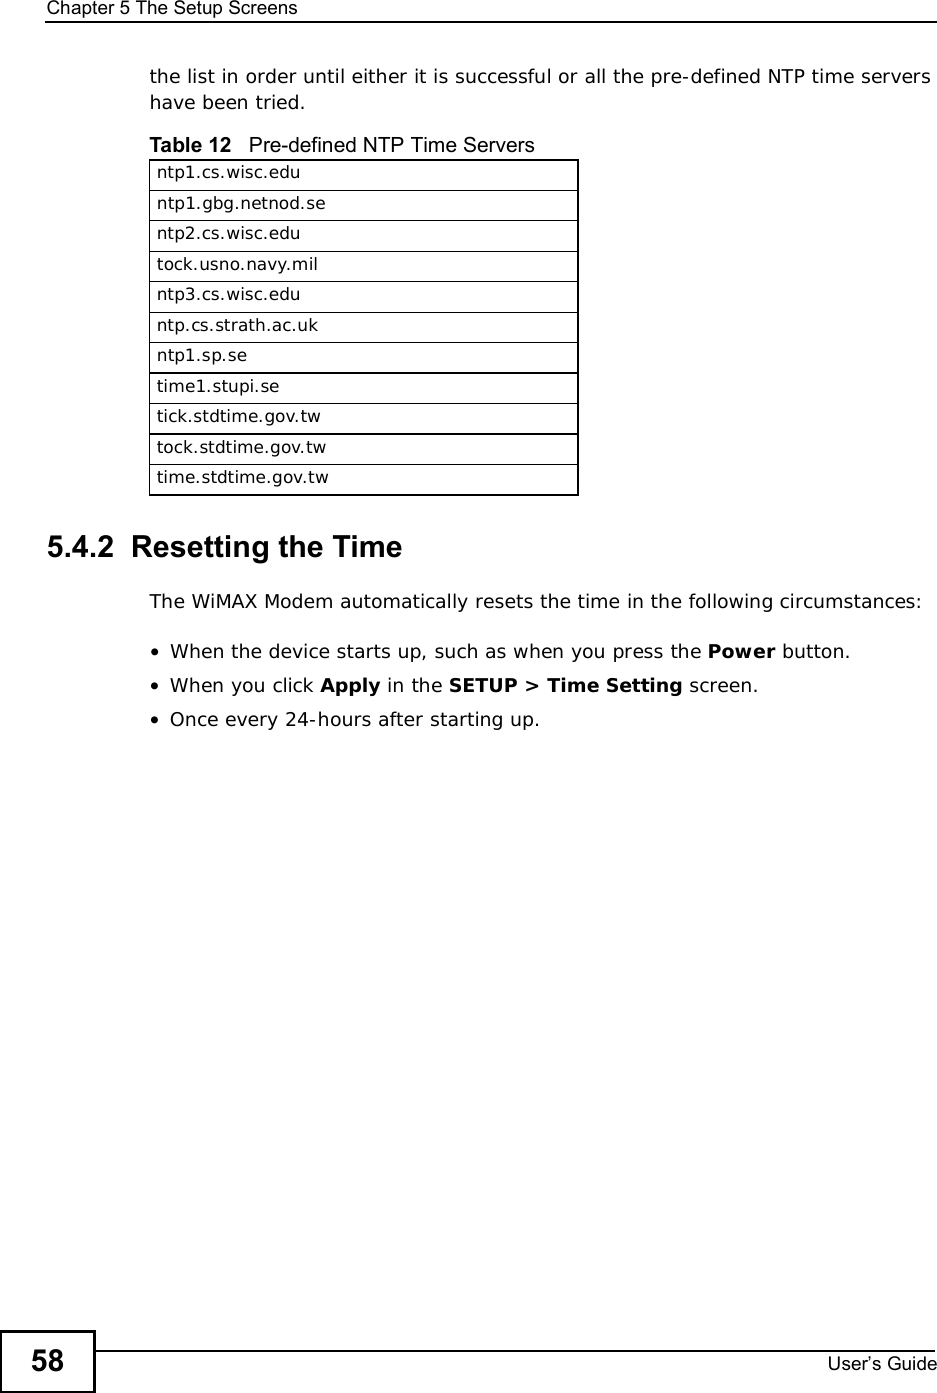 Chapter 5The Setup ScreensUser s Guide58the list in order until either it is successful or all the pre-defined NTP time servers have been tried. 5.4.2  Resetting the TimeThe WiMAX Modem automatically resets the time in the following circumstances:•When the device starts up, such as when you press the Power button.•When you click Apply in the SETUP &gt; Time Setting screen.•Once every 24-hours after starting up.Table 12   Pre-defined NTP Time Serversntp1.cs.wisc.eduntp1.gbg.netnod.sentp2.cs.wisc.edutock.usno.navy.milntp3.cs.wisc.eduntp.cs.strath.ac.ukntp1.sp.setime1.stupi.setick.stdtime.gov.twtock.stdtime.gov.twtime.stdtime.gov.tw